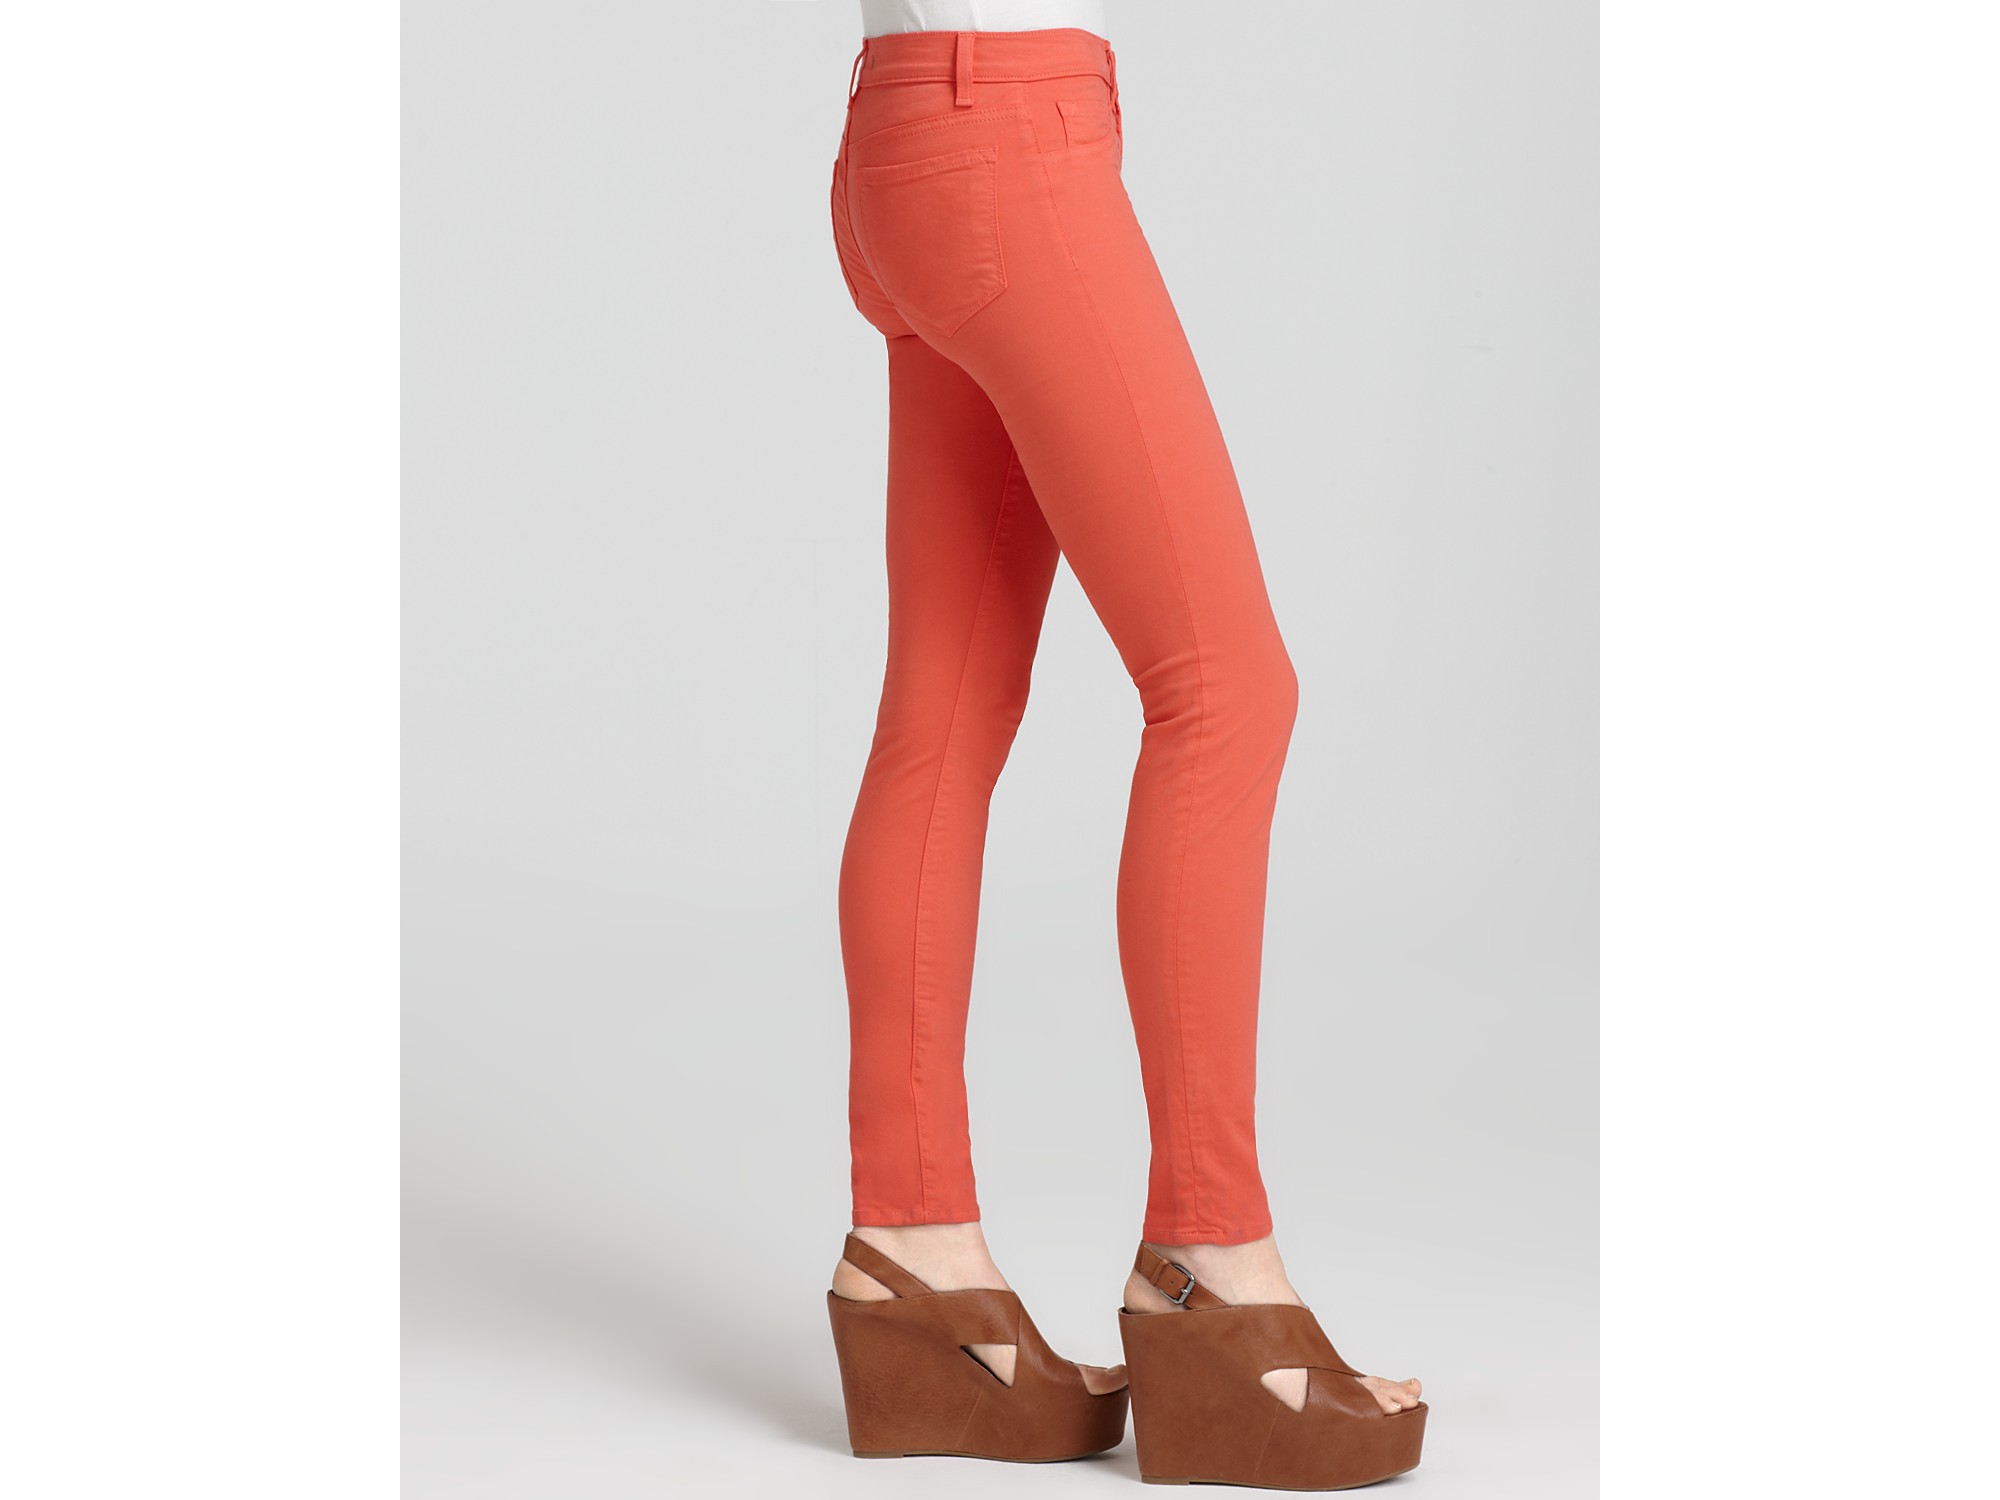 J Brand 811 Mid Rise Luxe Twill Skinny Jeans in Tigers 